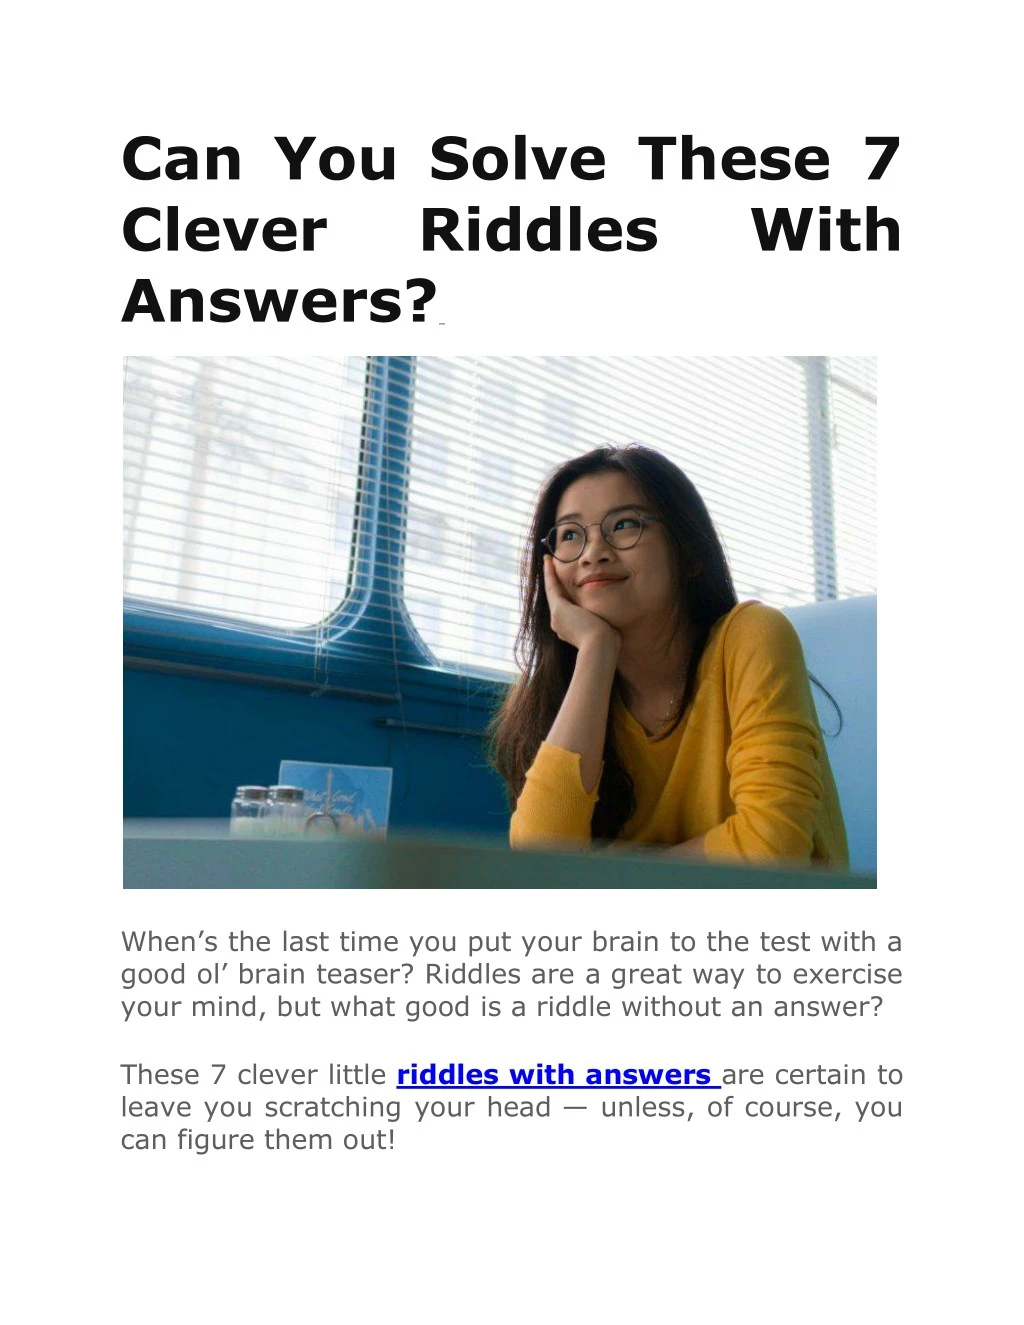 can you solve these 7 clever riddles answers